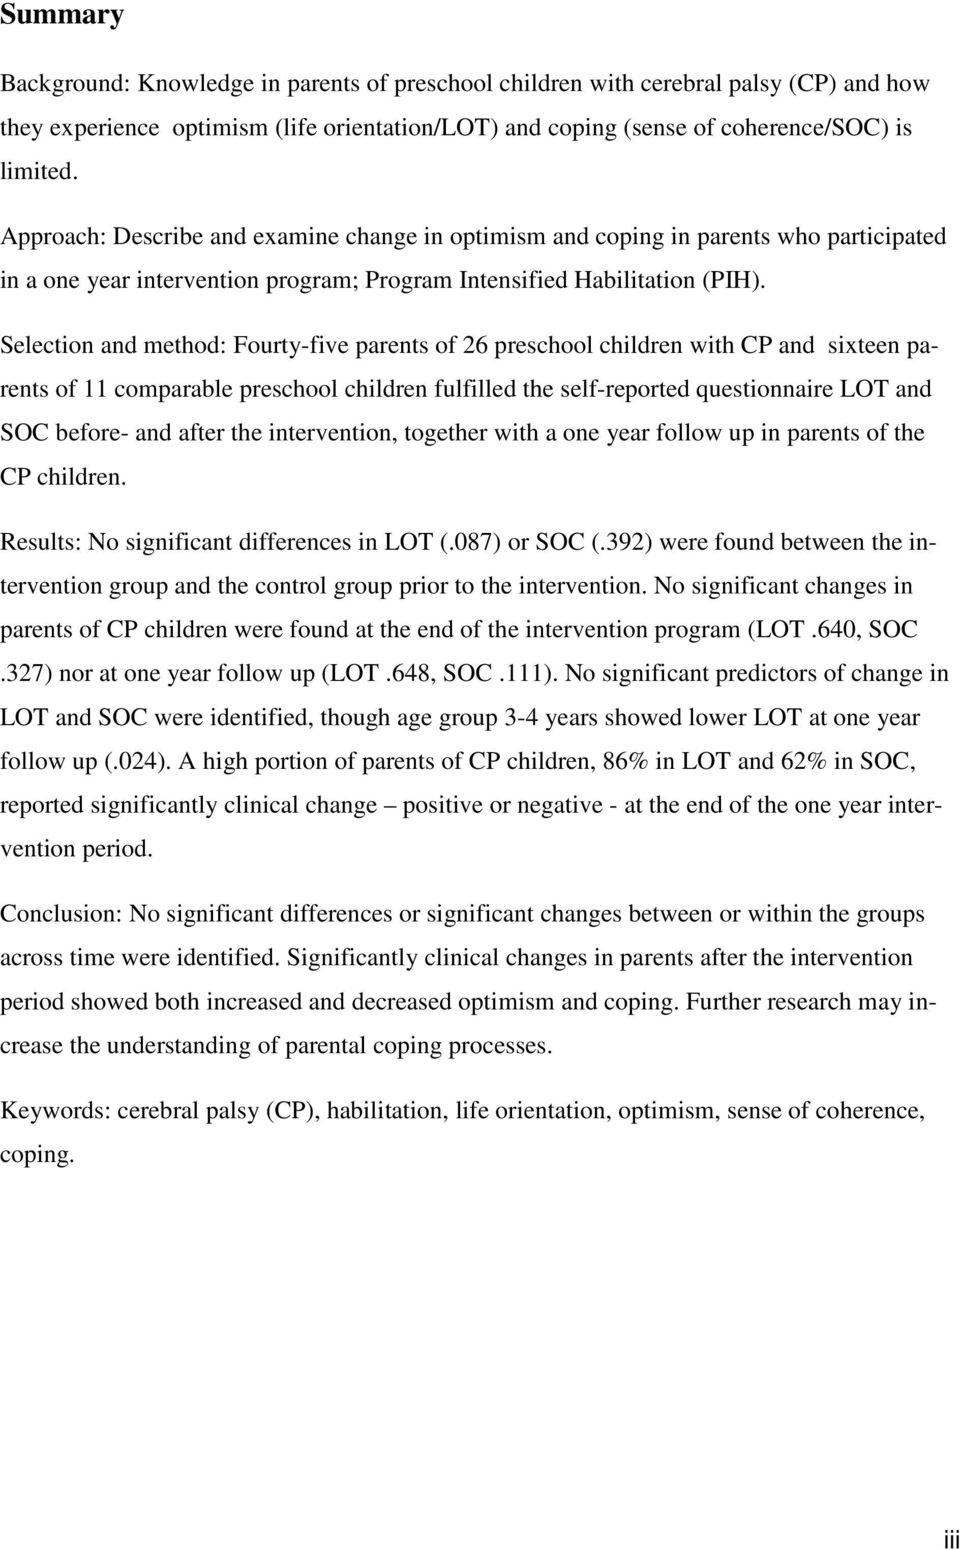 Selection and method: Fourty-five parents of 26 preschool children with CP and sixteen parents of 11 comparable preschool children fulfilled the self-reported questionnaire LOT and SOC before- and